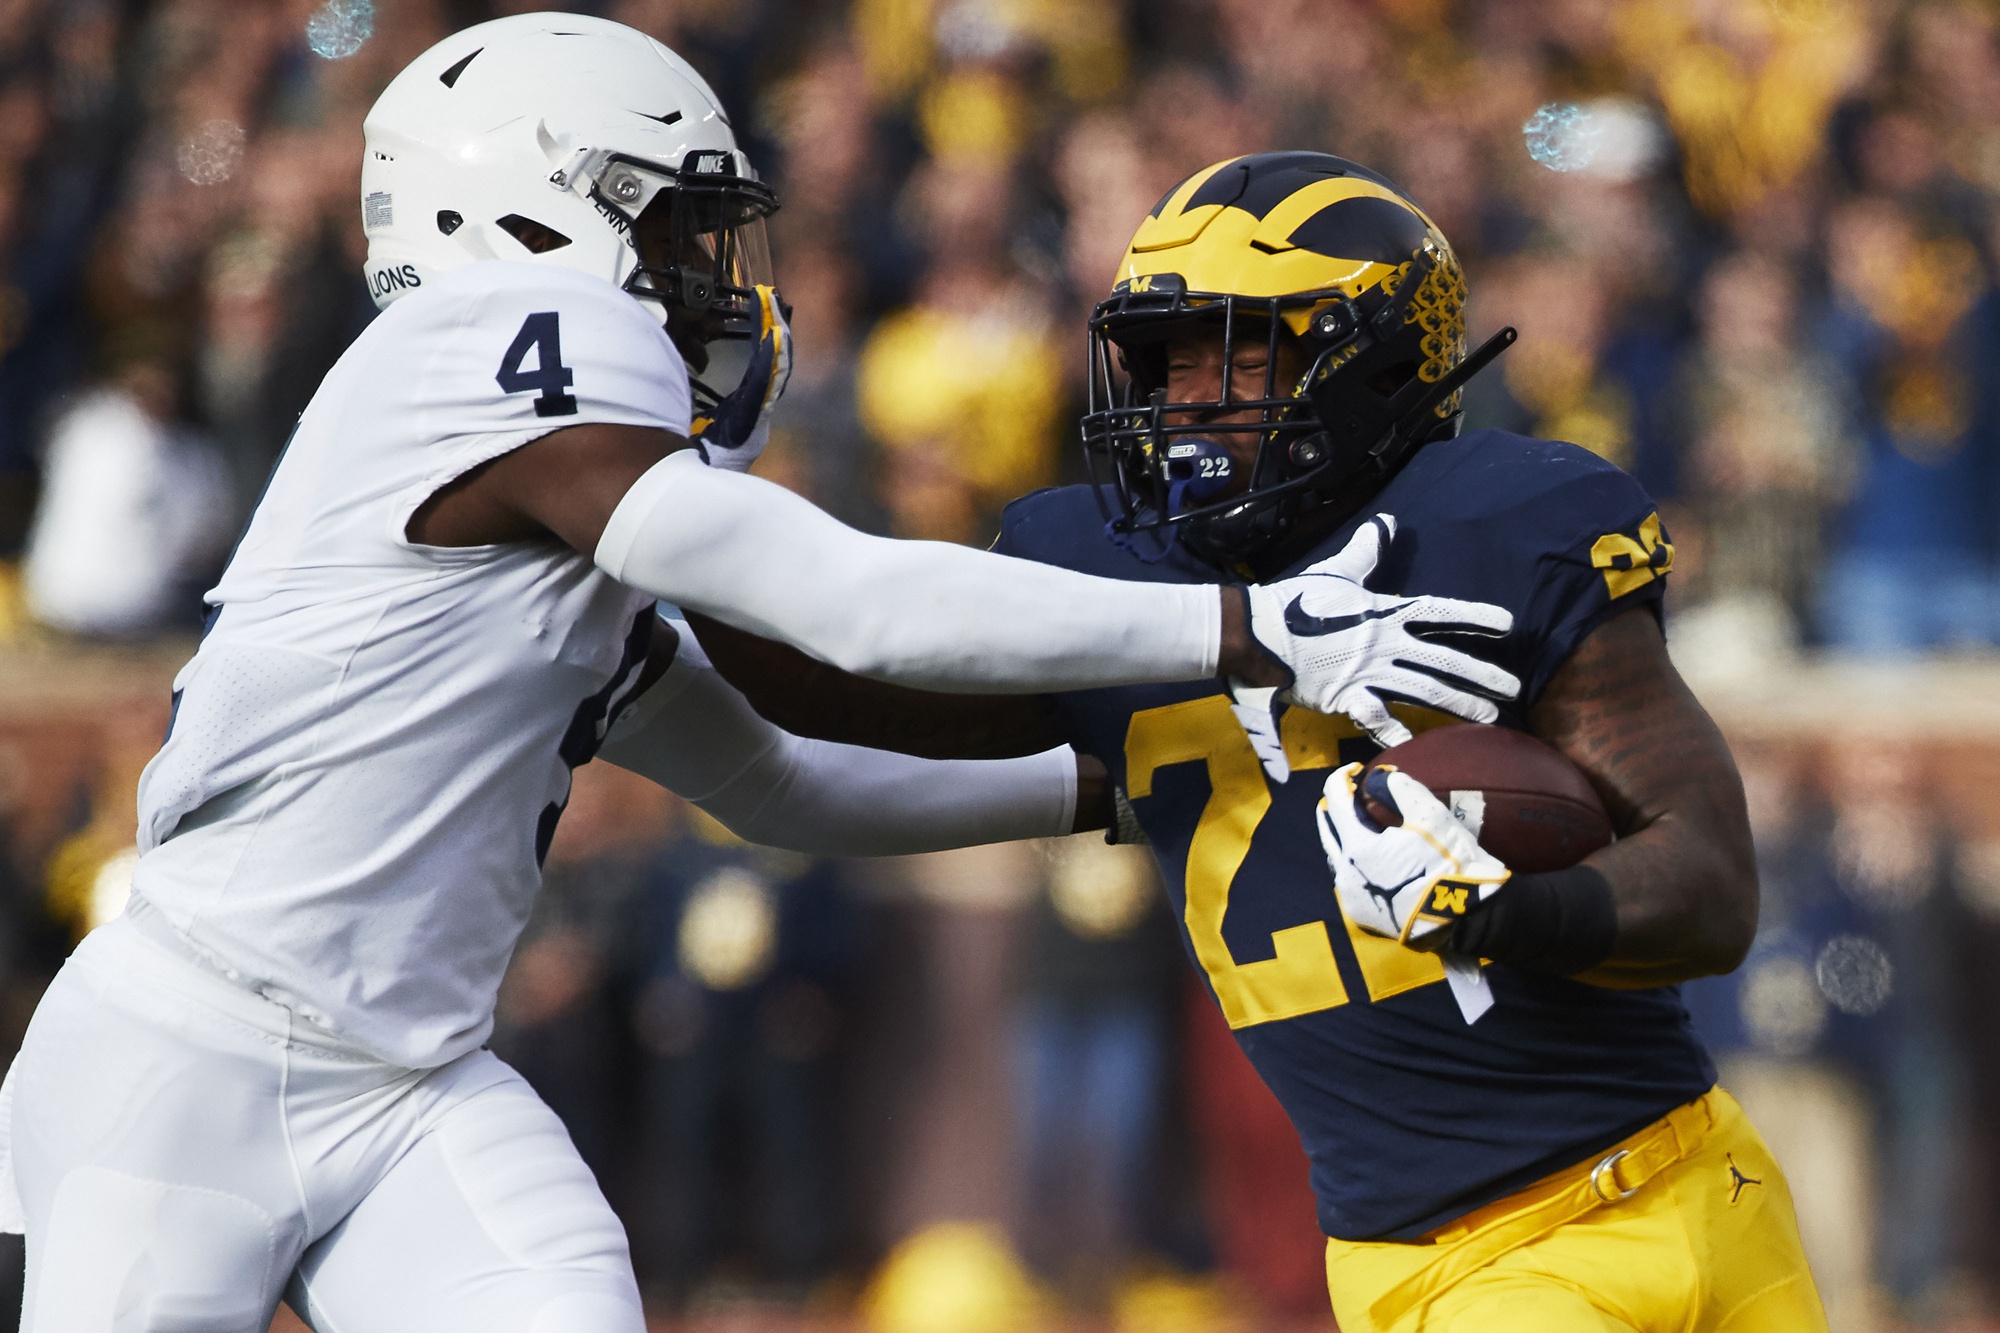 Podcast: Talking Michigan, Jim Harbaugh, Joker and more with Ian Casselberry